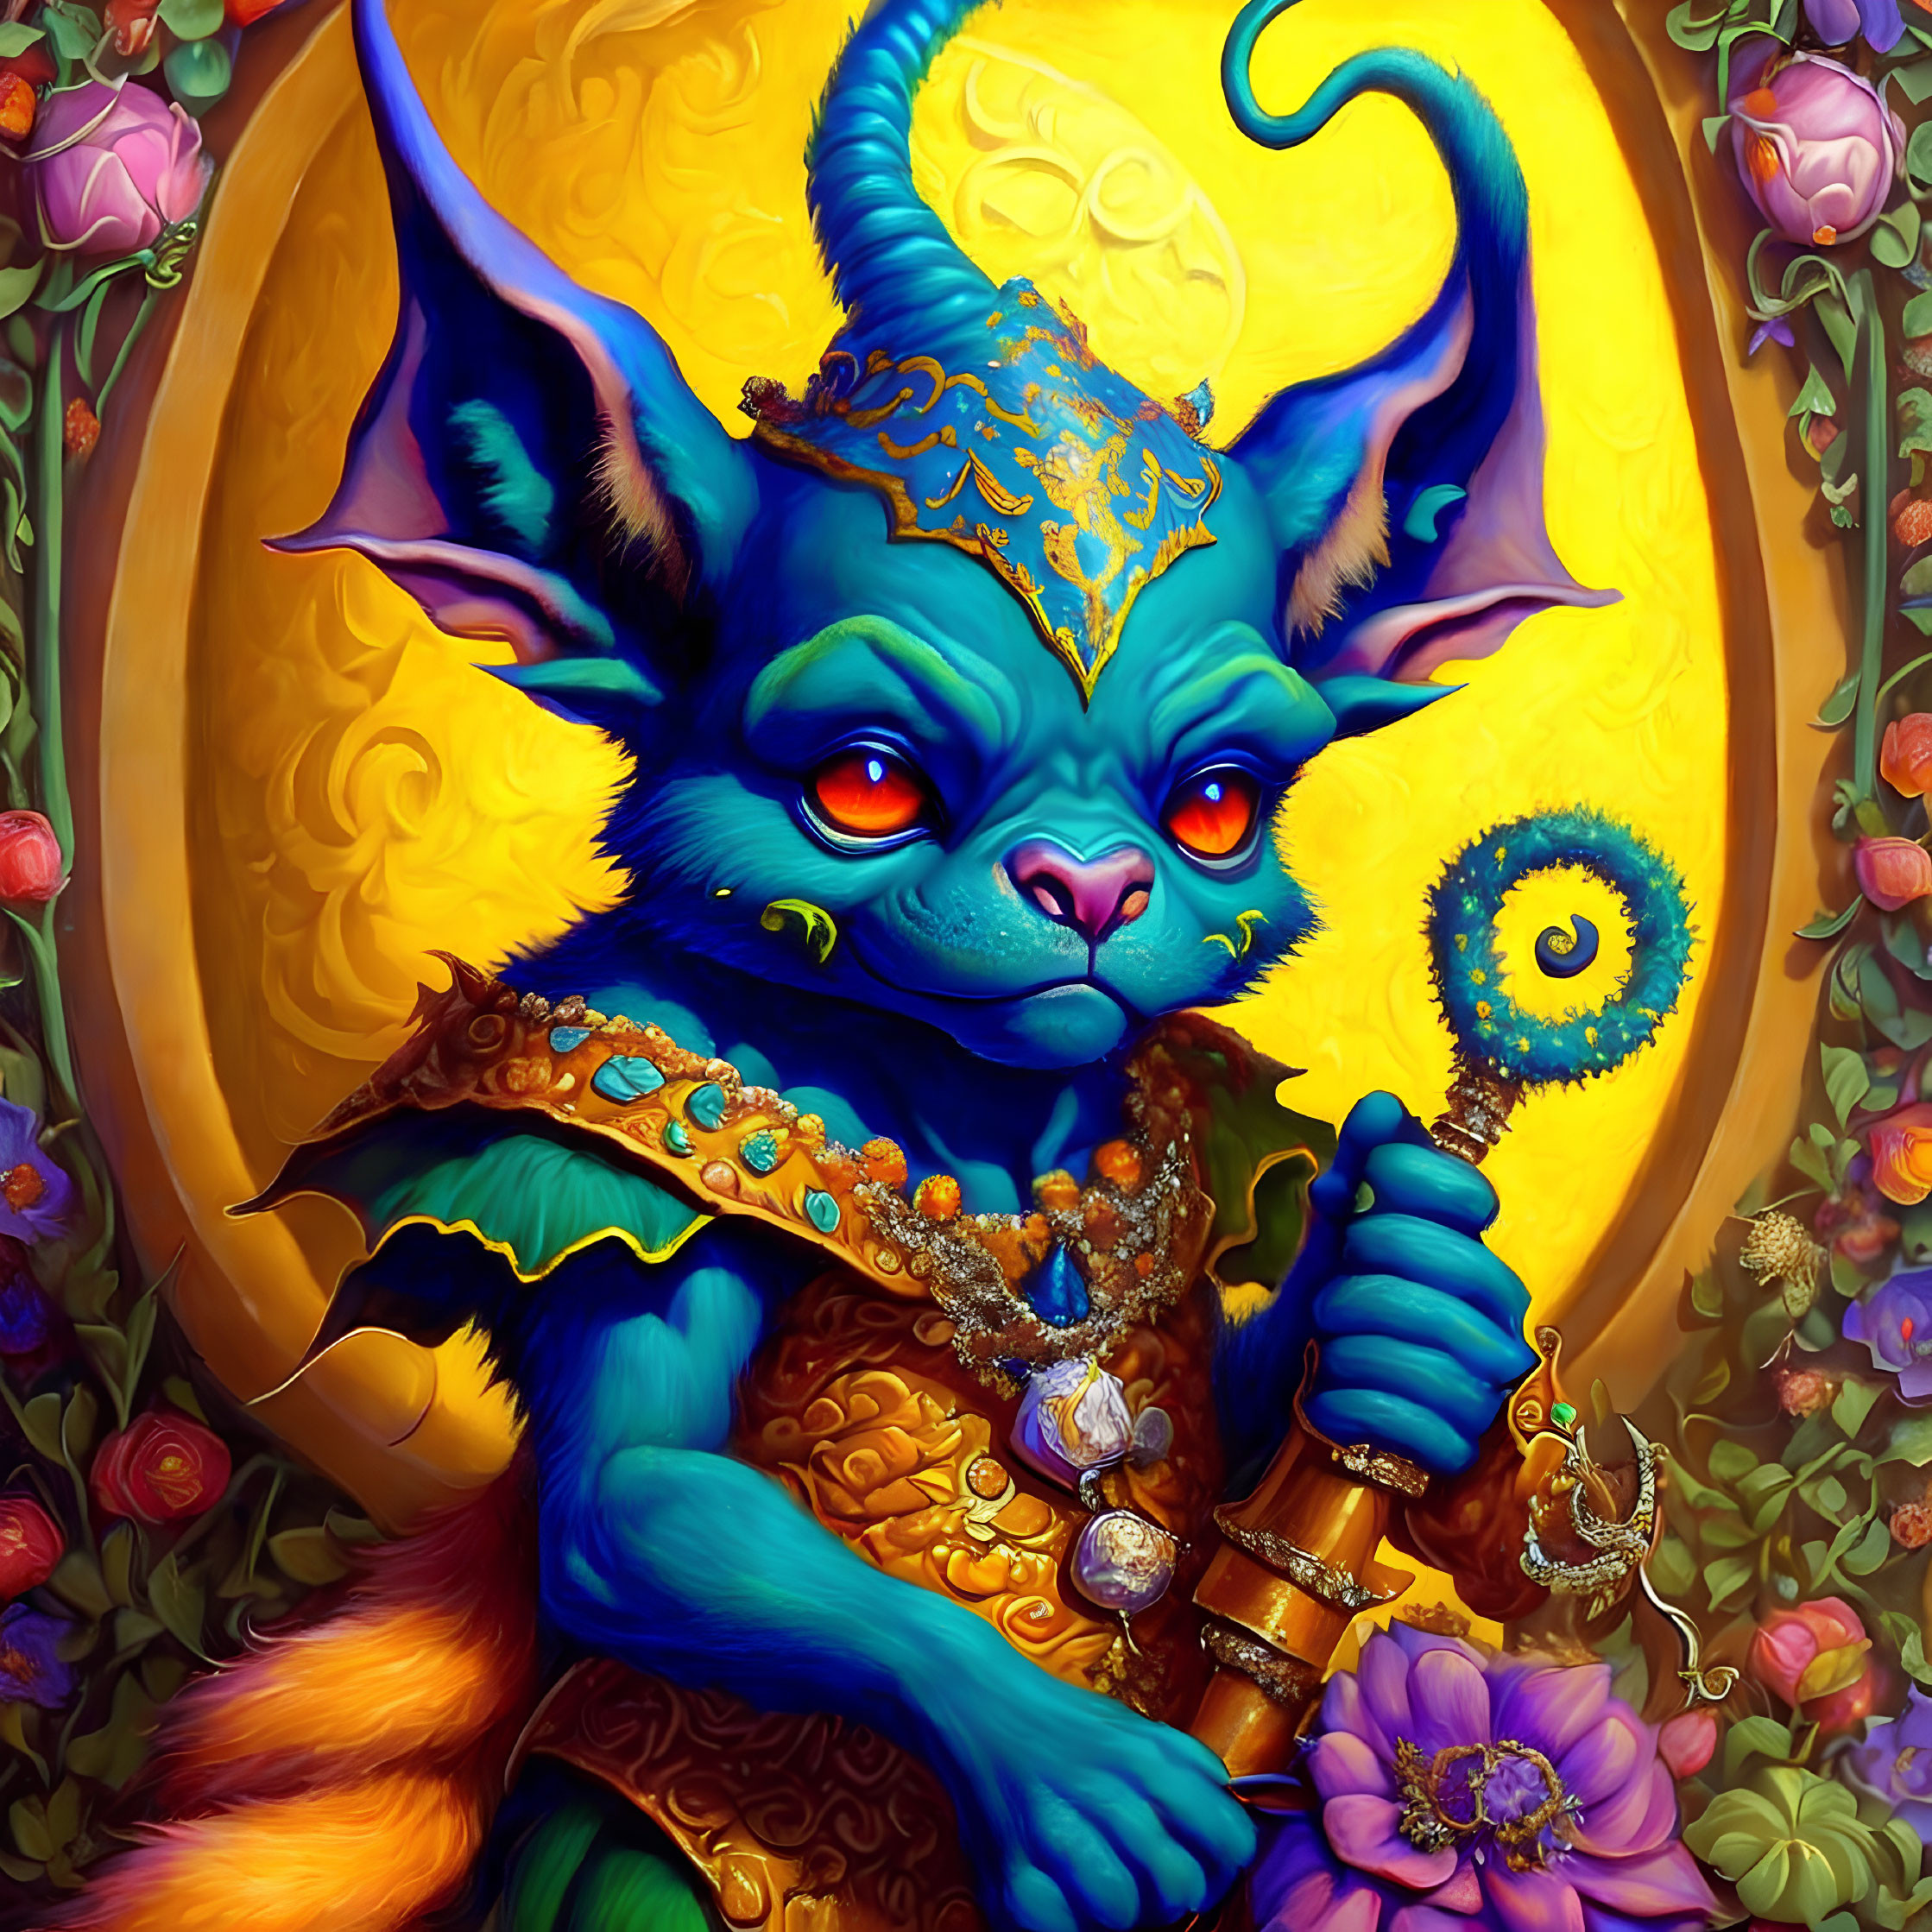 Colorful Illustration of Regal Blue Anthropomorphic Feline in Floral Setting